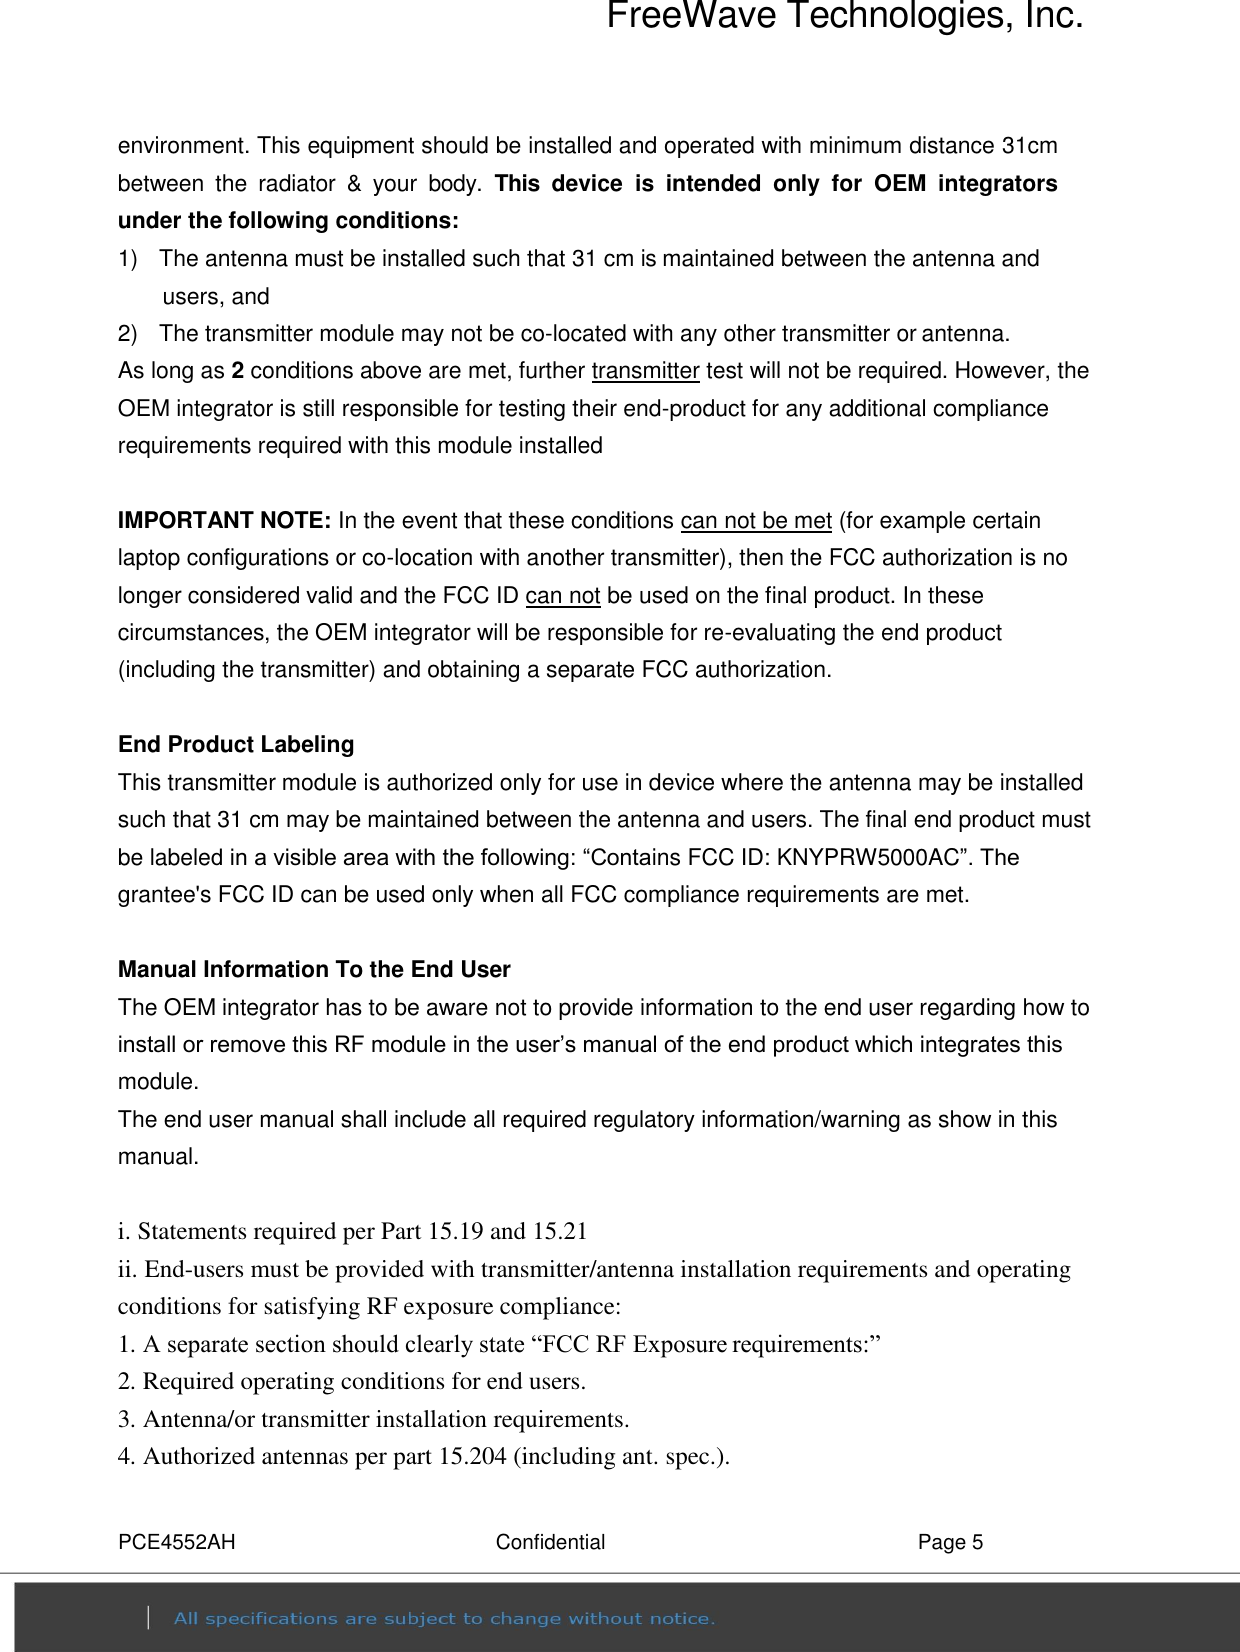 Page 5 of FreeWave Technologies PRW5000AC Wireless 802.11ac/b/g/n access point User Manual PCE4552AH specification v0 2